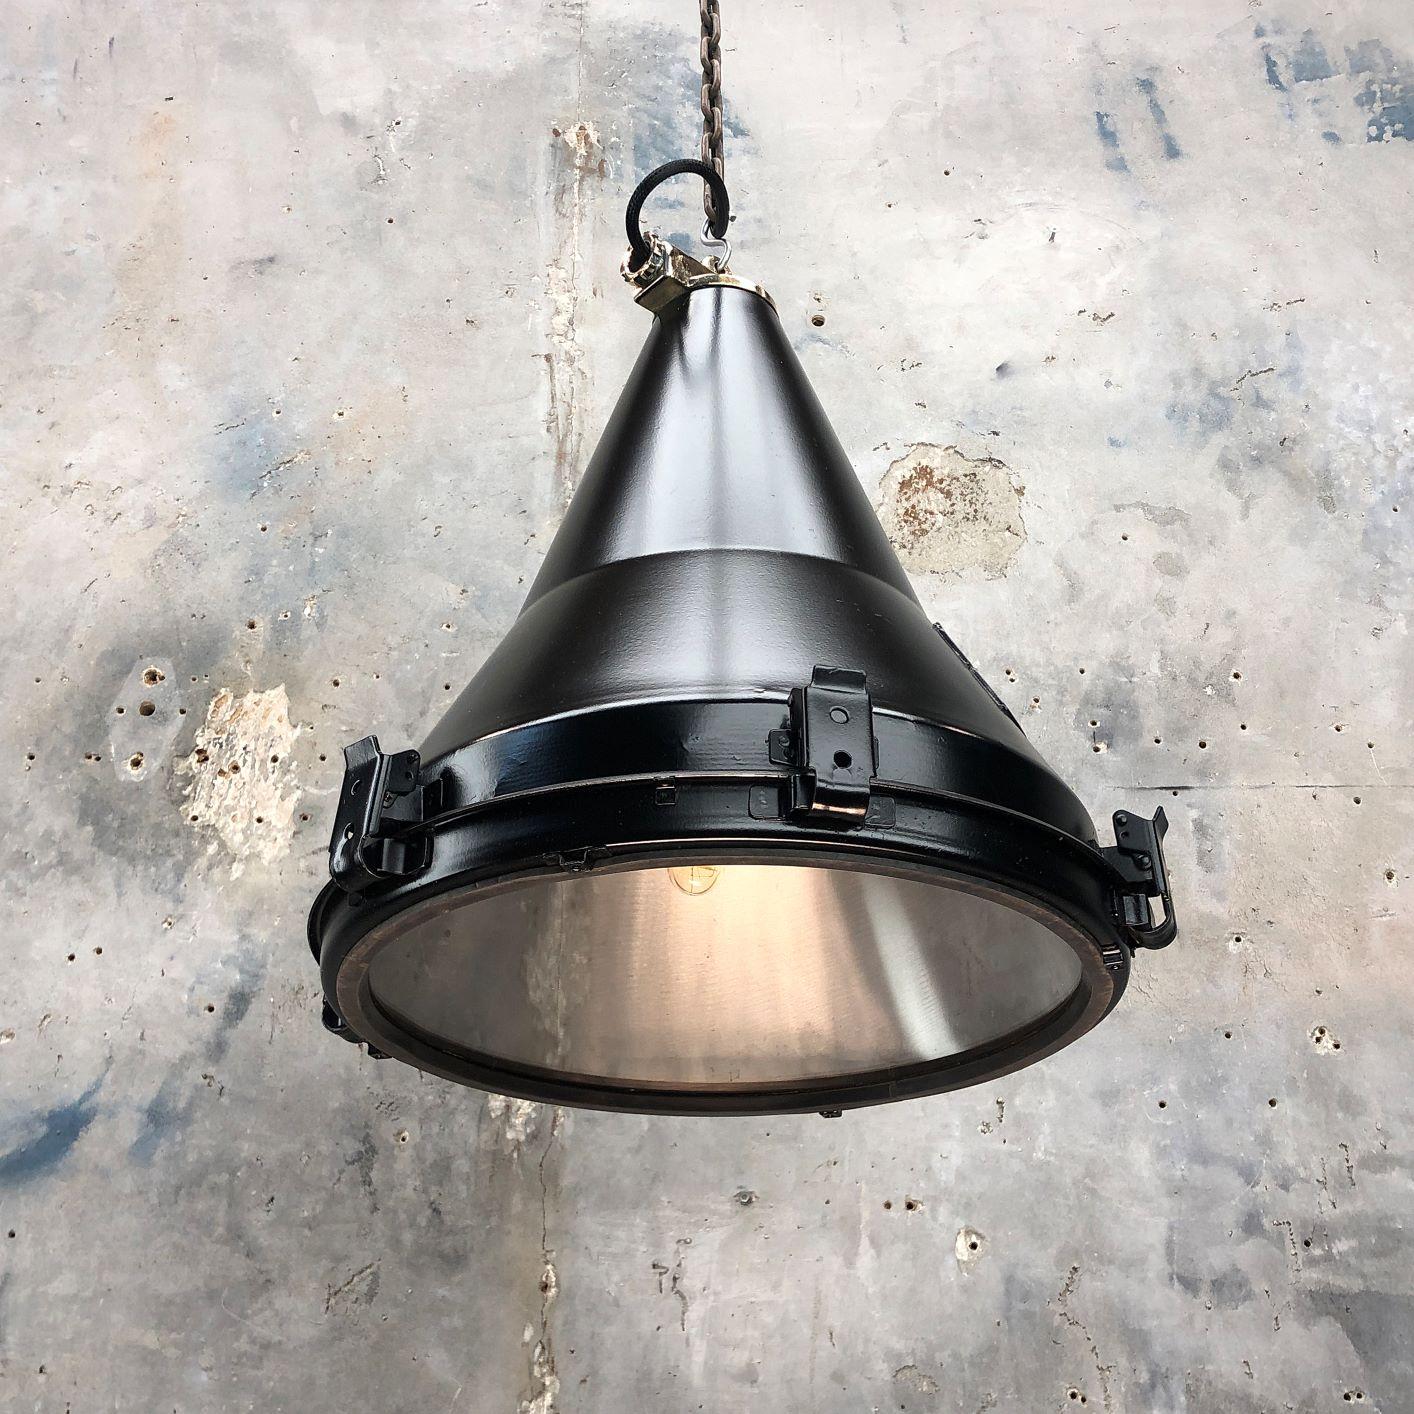 A vintage industrial black conical ceiling pendant by Daeyang made in South Korea, circa 1970. Reclaimed from cargo ships and professionally reclaimed by Loomlight in UK ready for modern interiors.
 
Specifications
Measures: Diameter 42